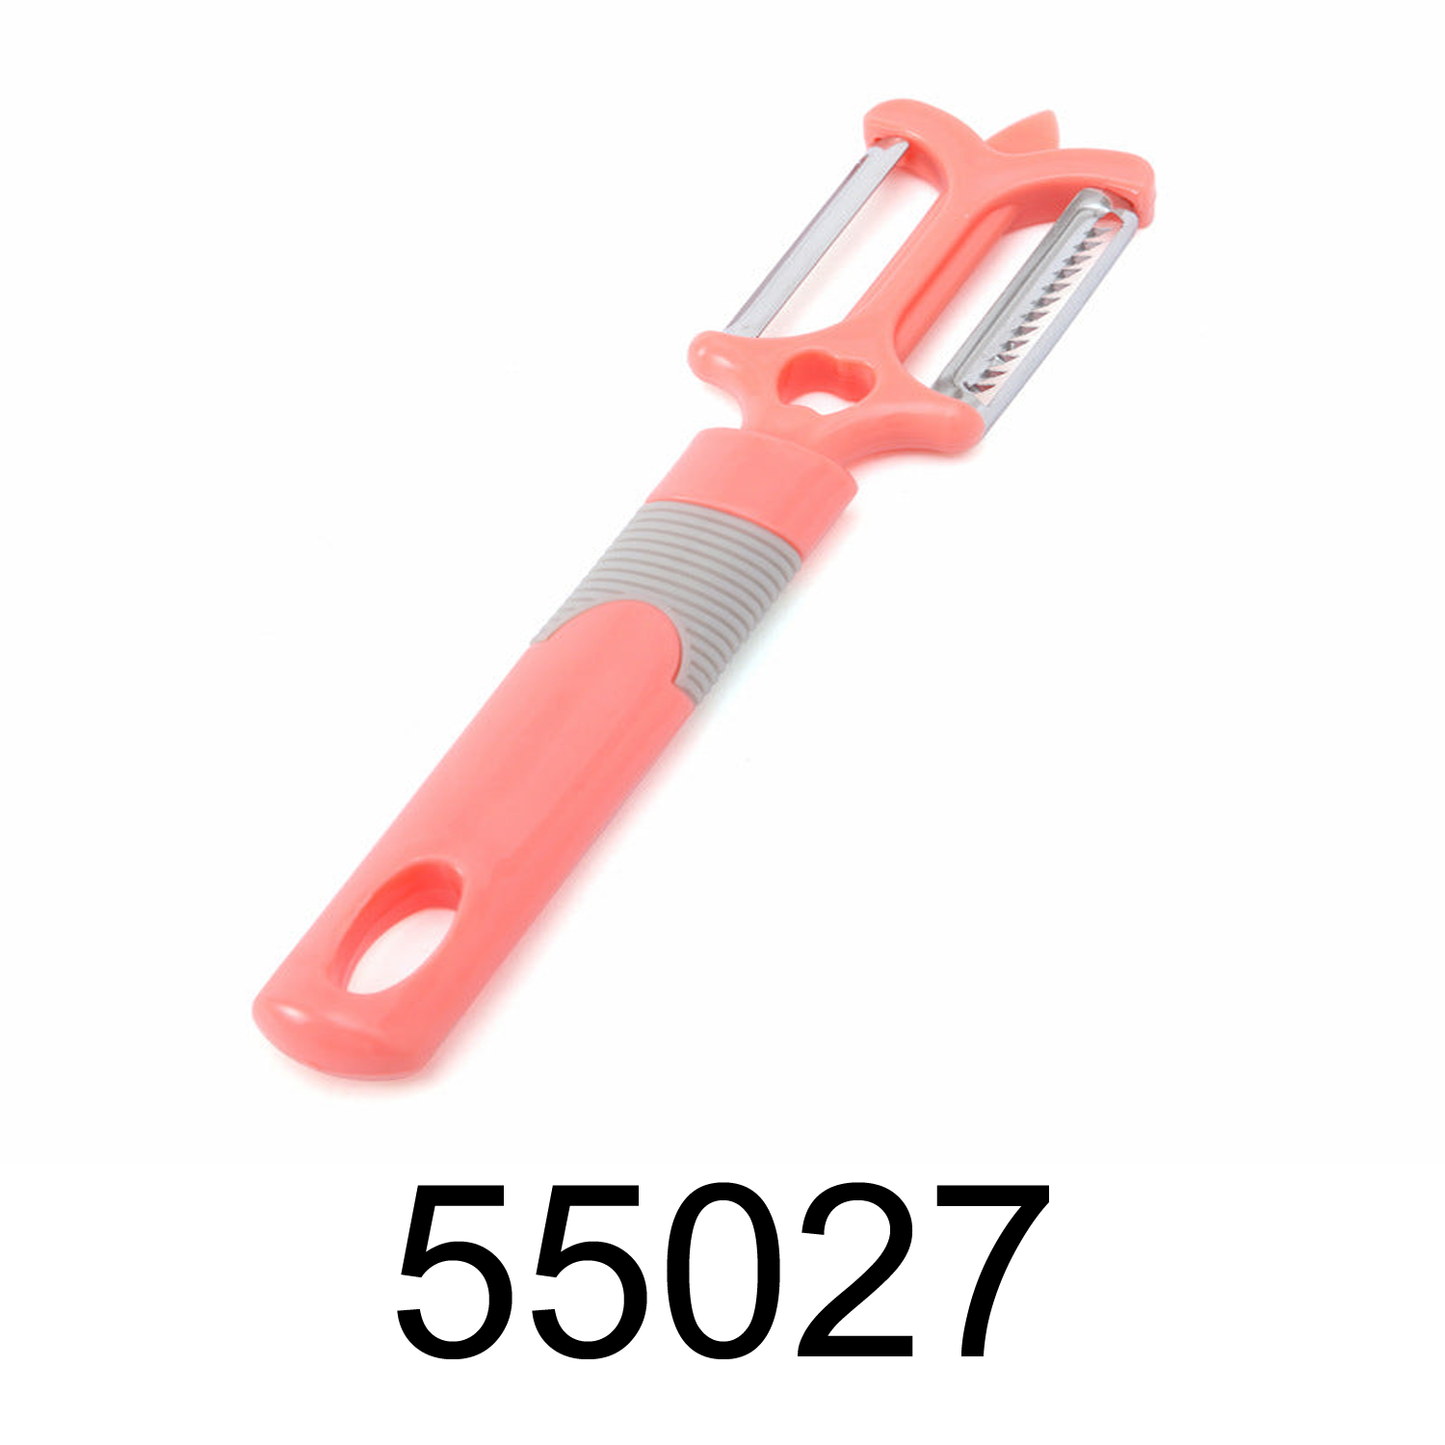 Pink Double-sided Peeler For Apple, Carrot, Cucumber